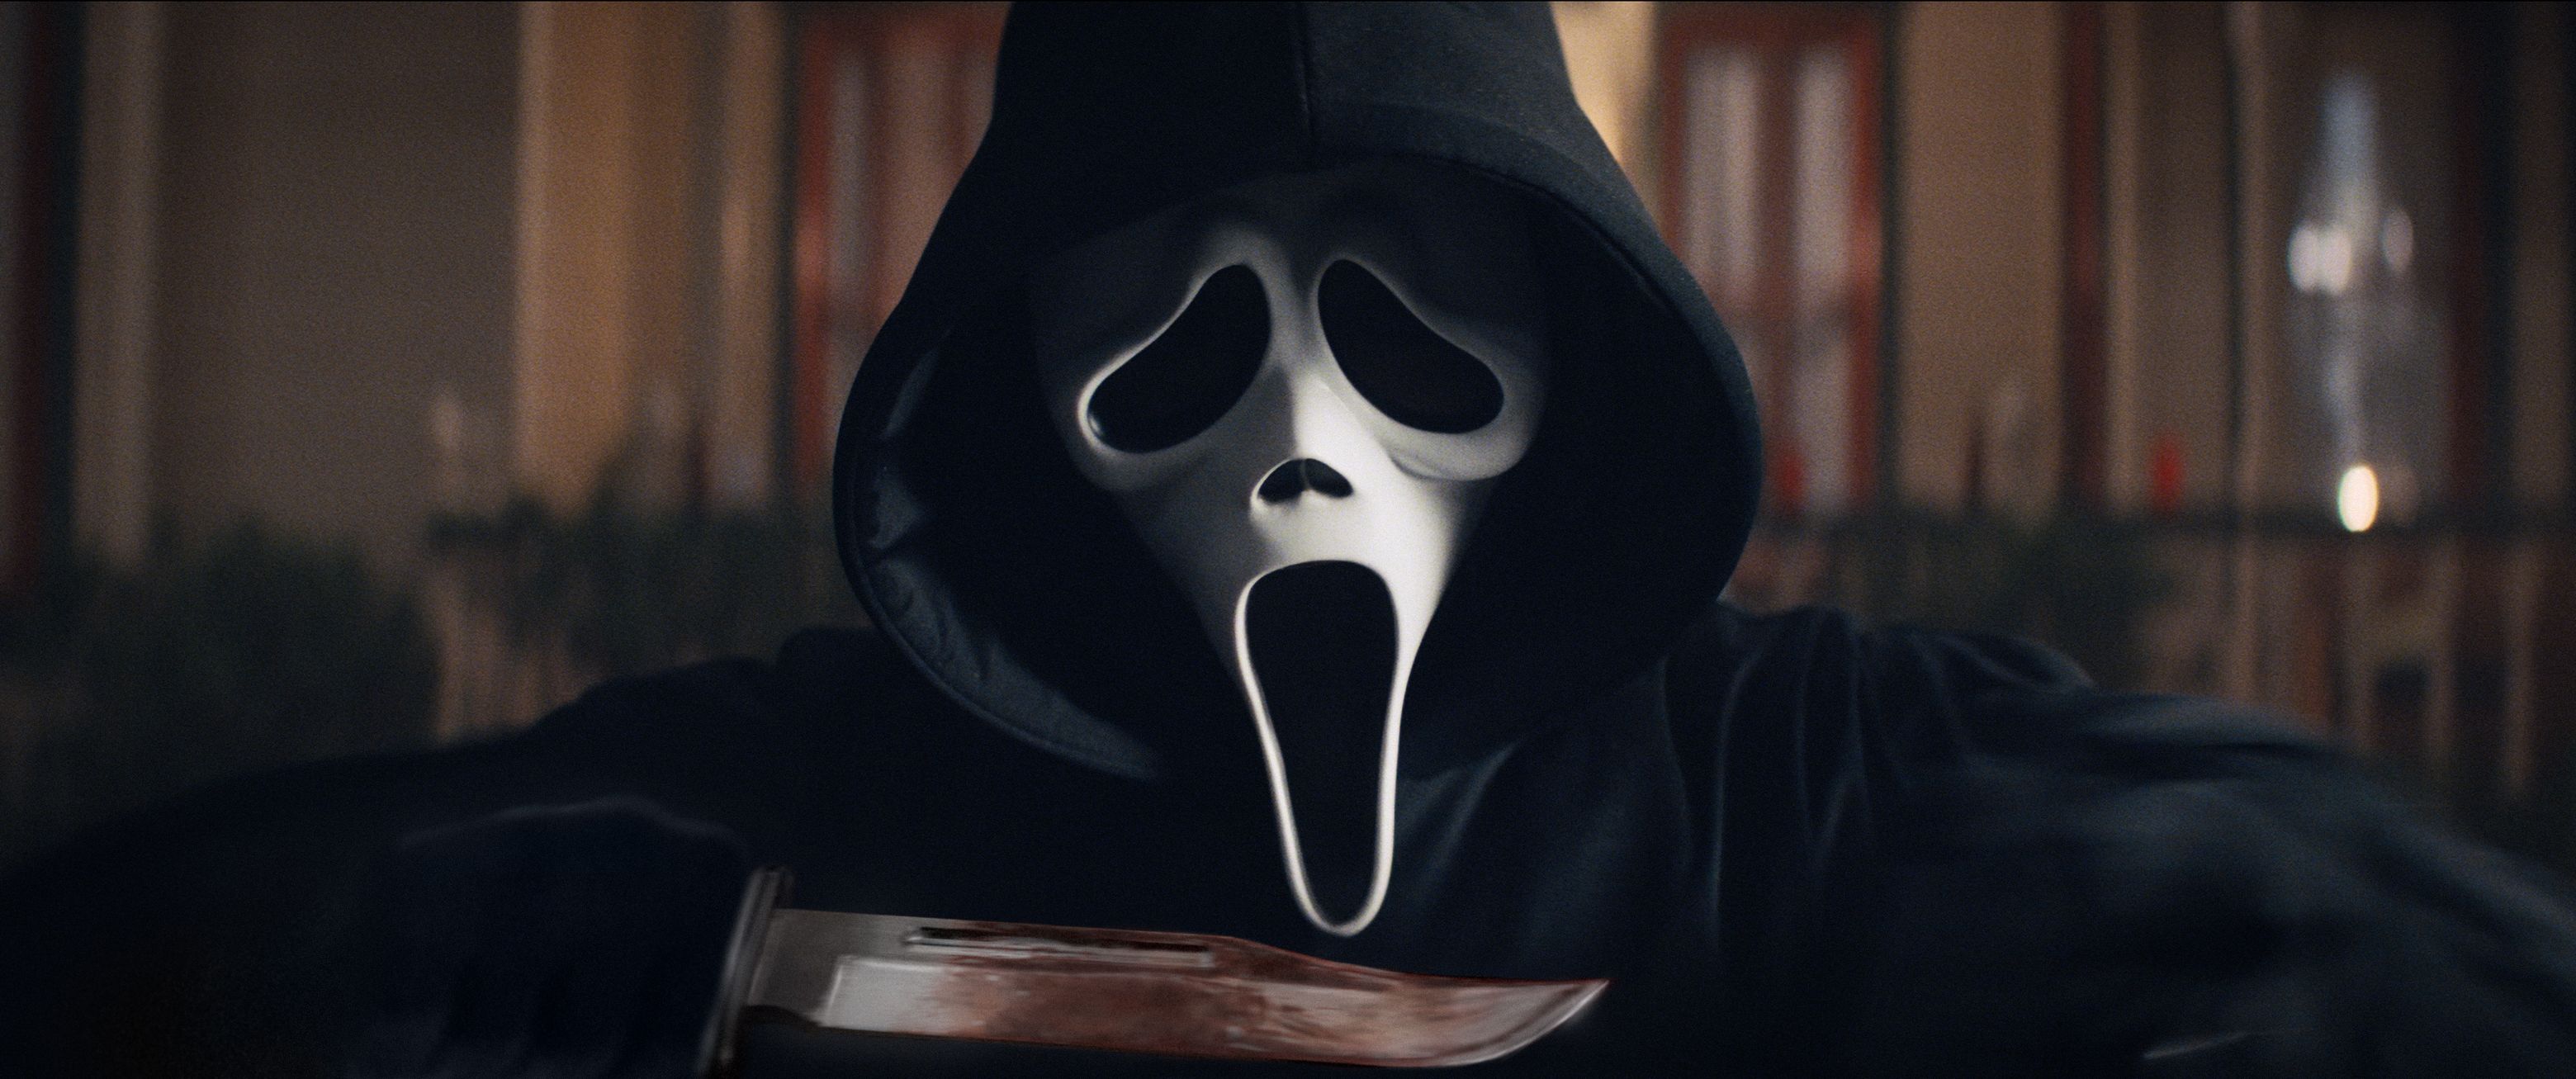 Movie Review: The new Scream (2022), starring Neve Campbell